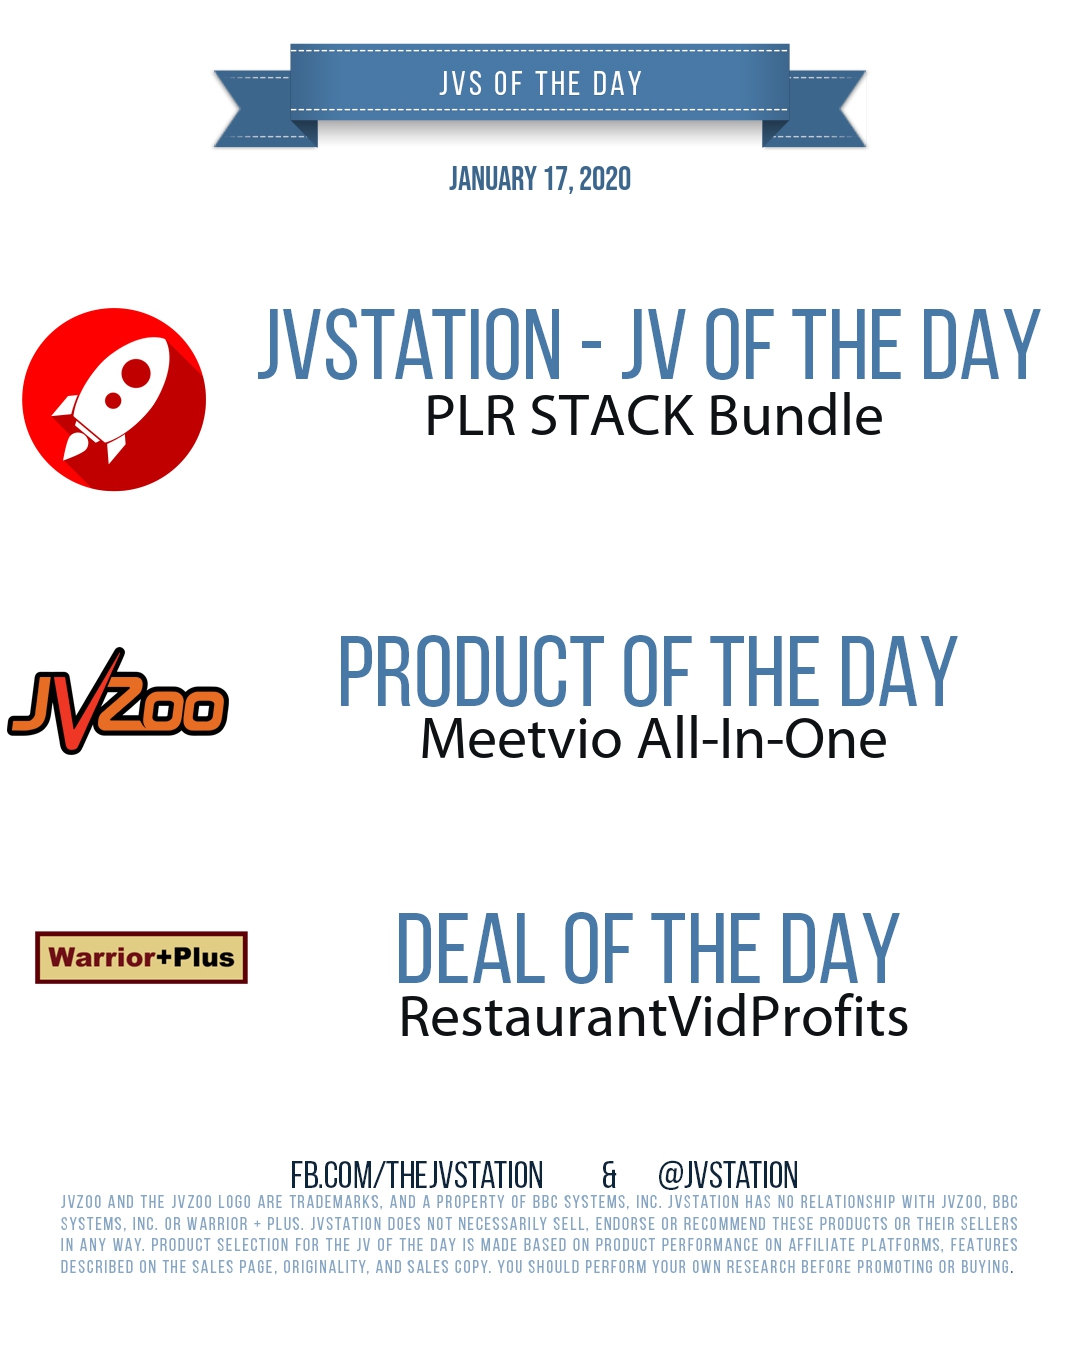 JVs of the day - January 17, 2020